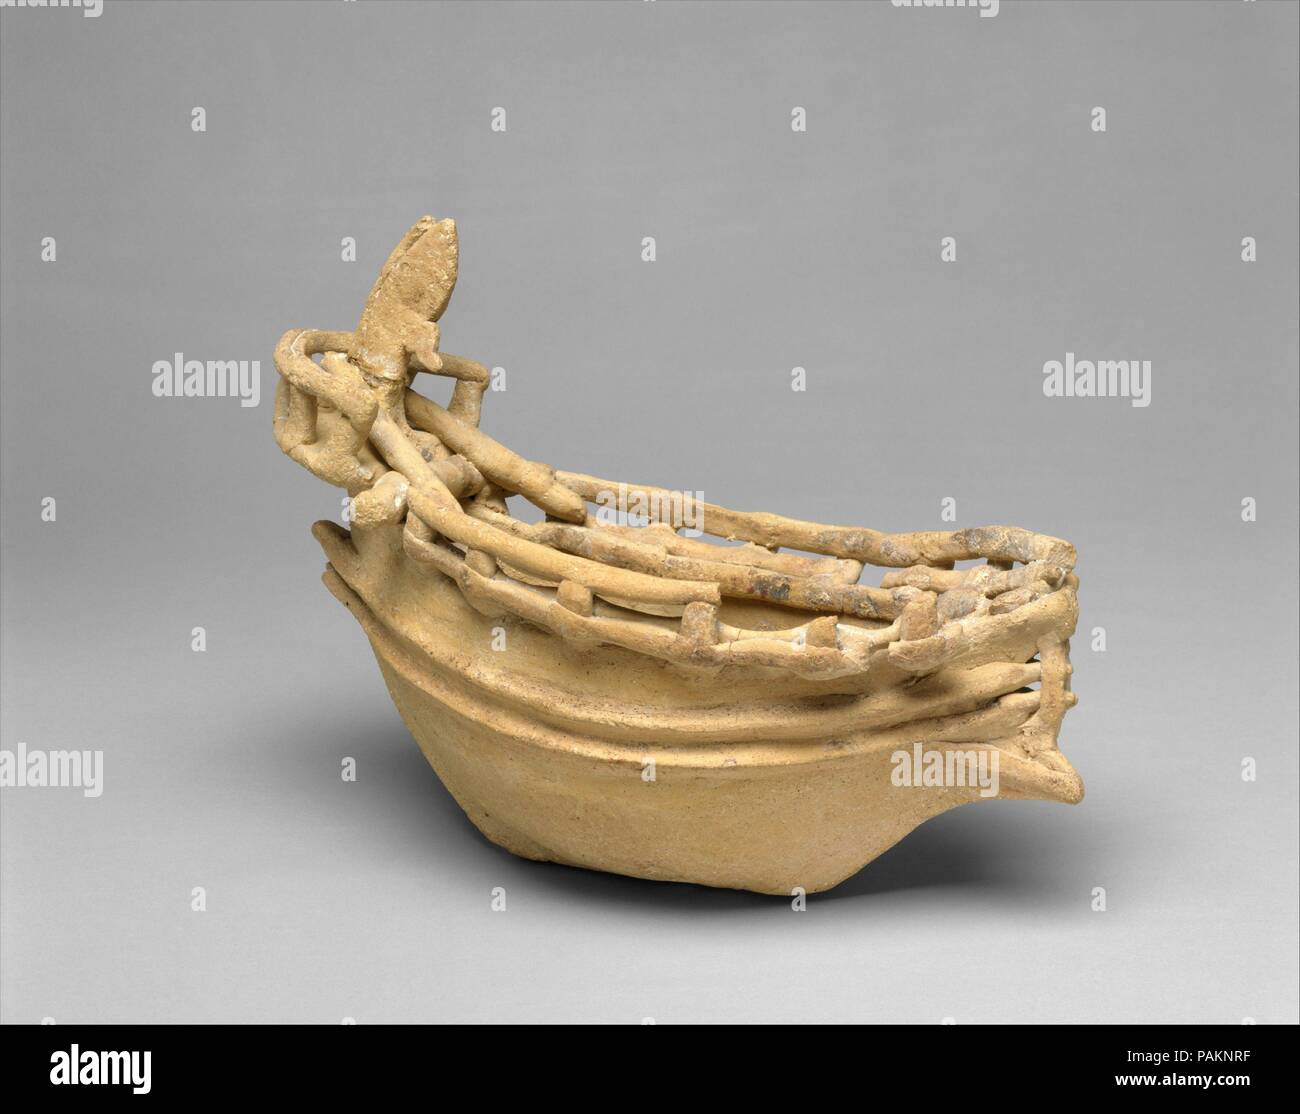 Terracotta model of a ship. Culture: Cypriot. Dimensions: H. 7 in. (17.8 cm). Date: ca. 600-480 B.C..  The model depicts, in considerable detail, the features of a contemporary vessel. It includes the helmsman sitting in the bow. All of the preserved ship models come from Amathus, indicating the importance of the site as a maritime center. Museum: Metropolitan Museum of Art, New York, USA. Stock Photo